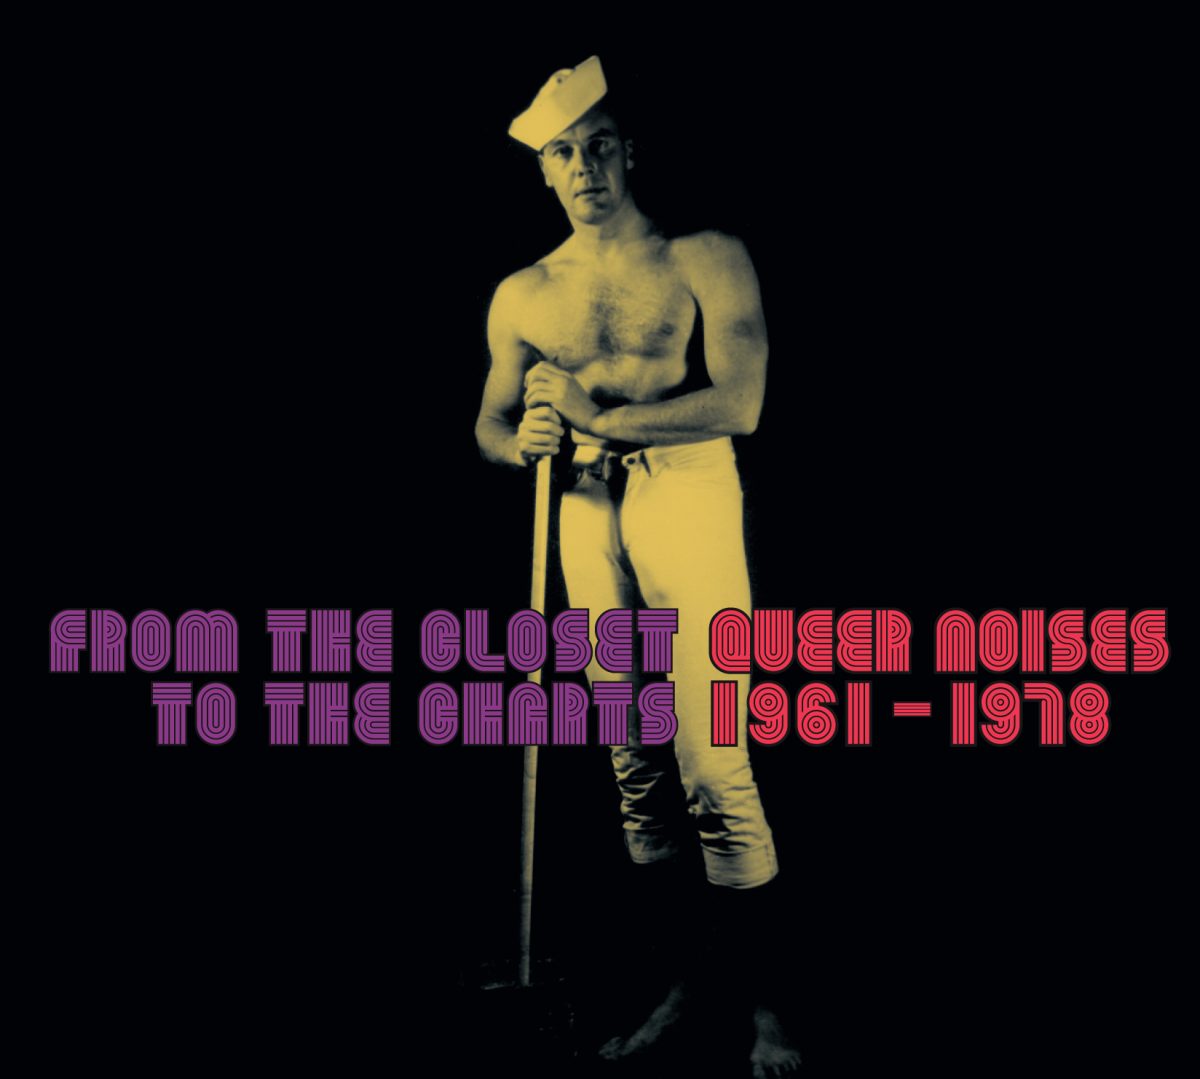 Queer Noises - 1961-1978 From the Closet to the Charts 1